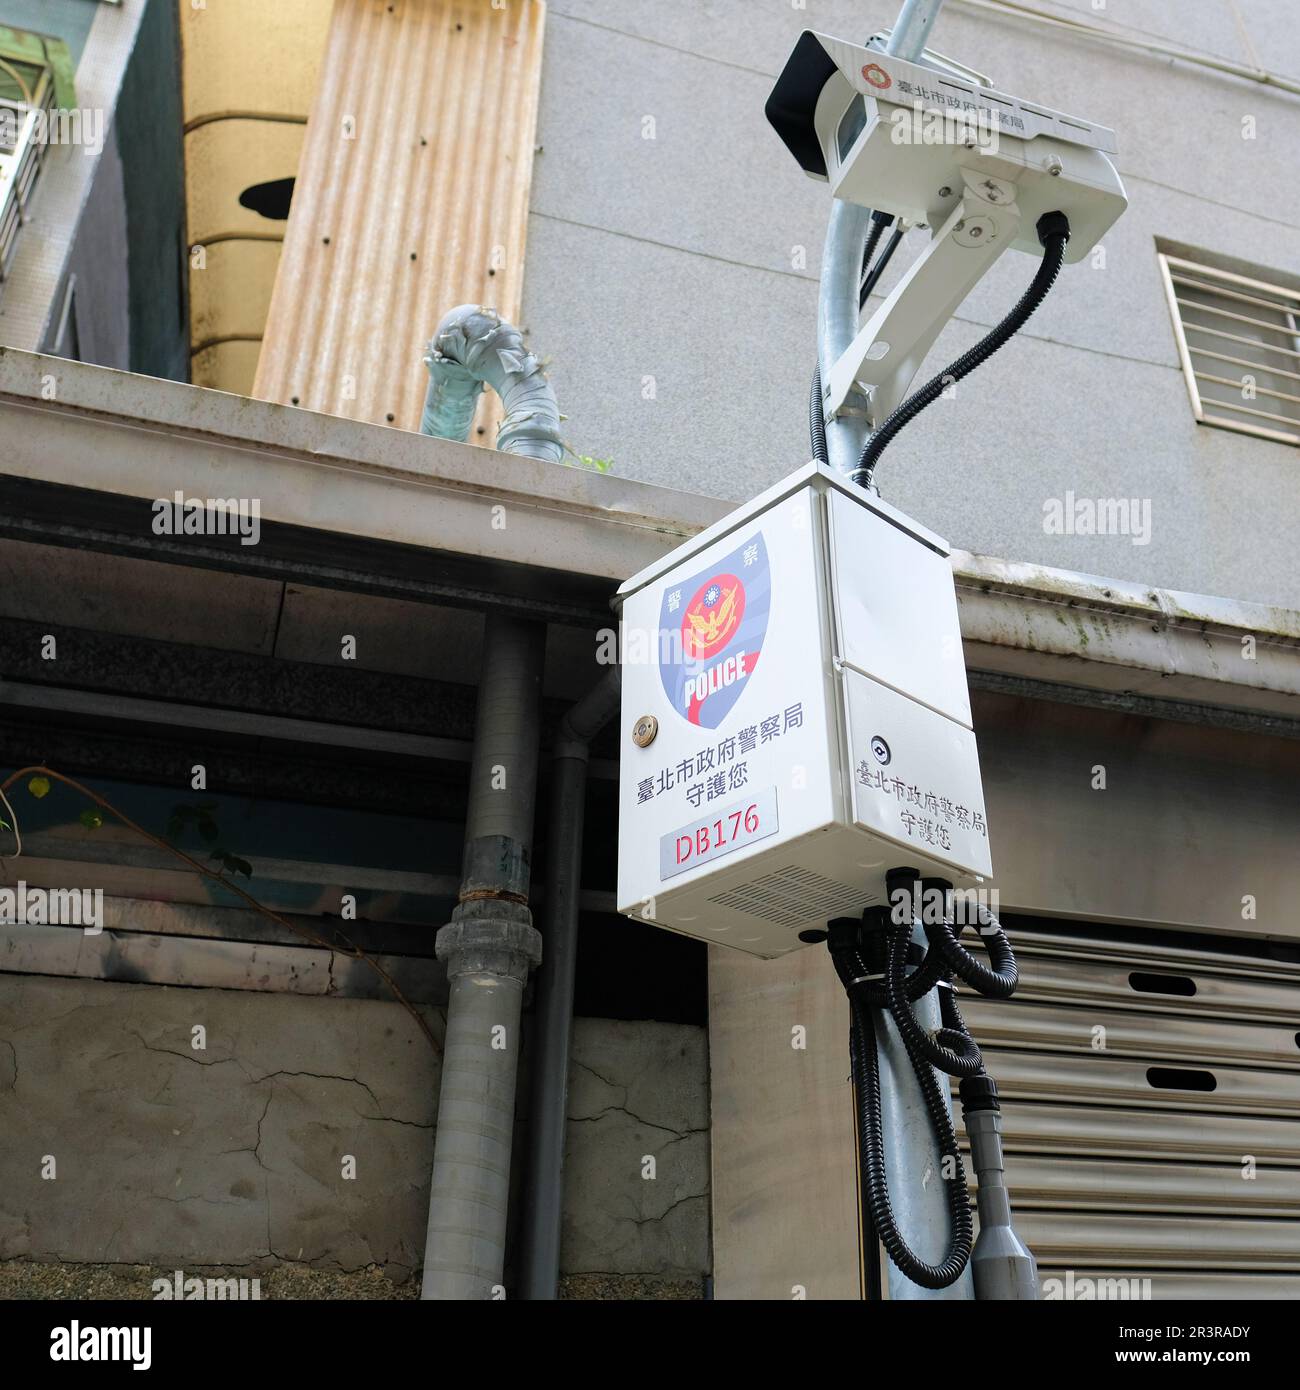 A Taipei Police department surveillance camera mounted on a pole for monitoring traffic and streets providing safety, security, vigilance in Taiwan. Stock Photo